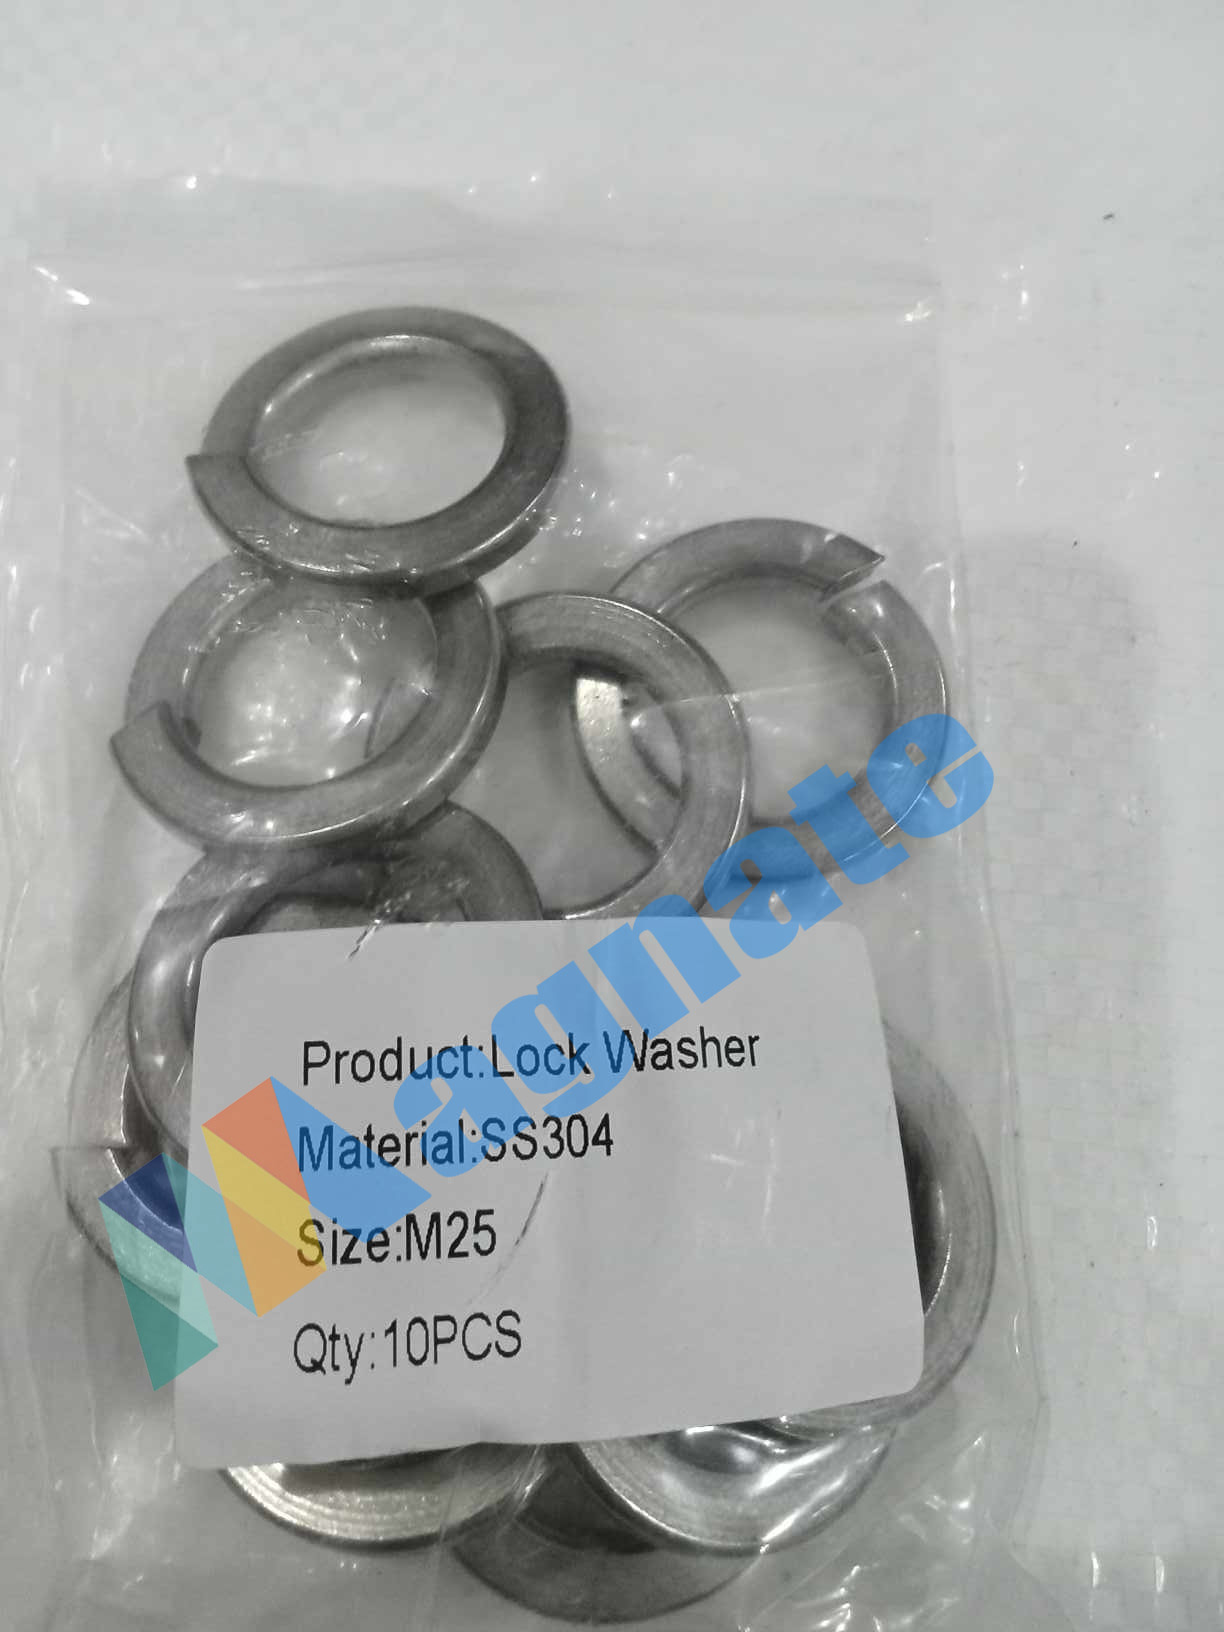 Lock Washer Material: SS304 Size: M25